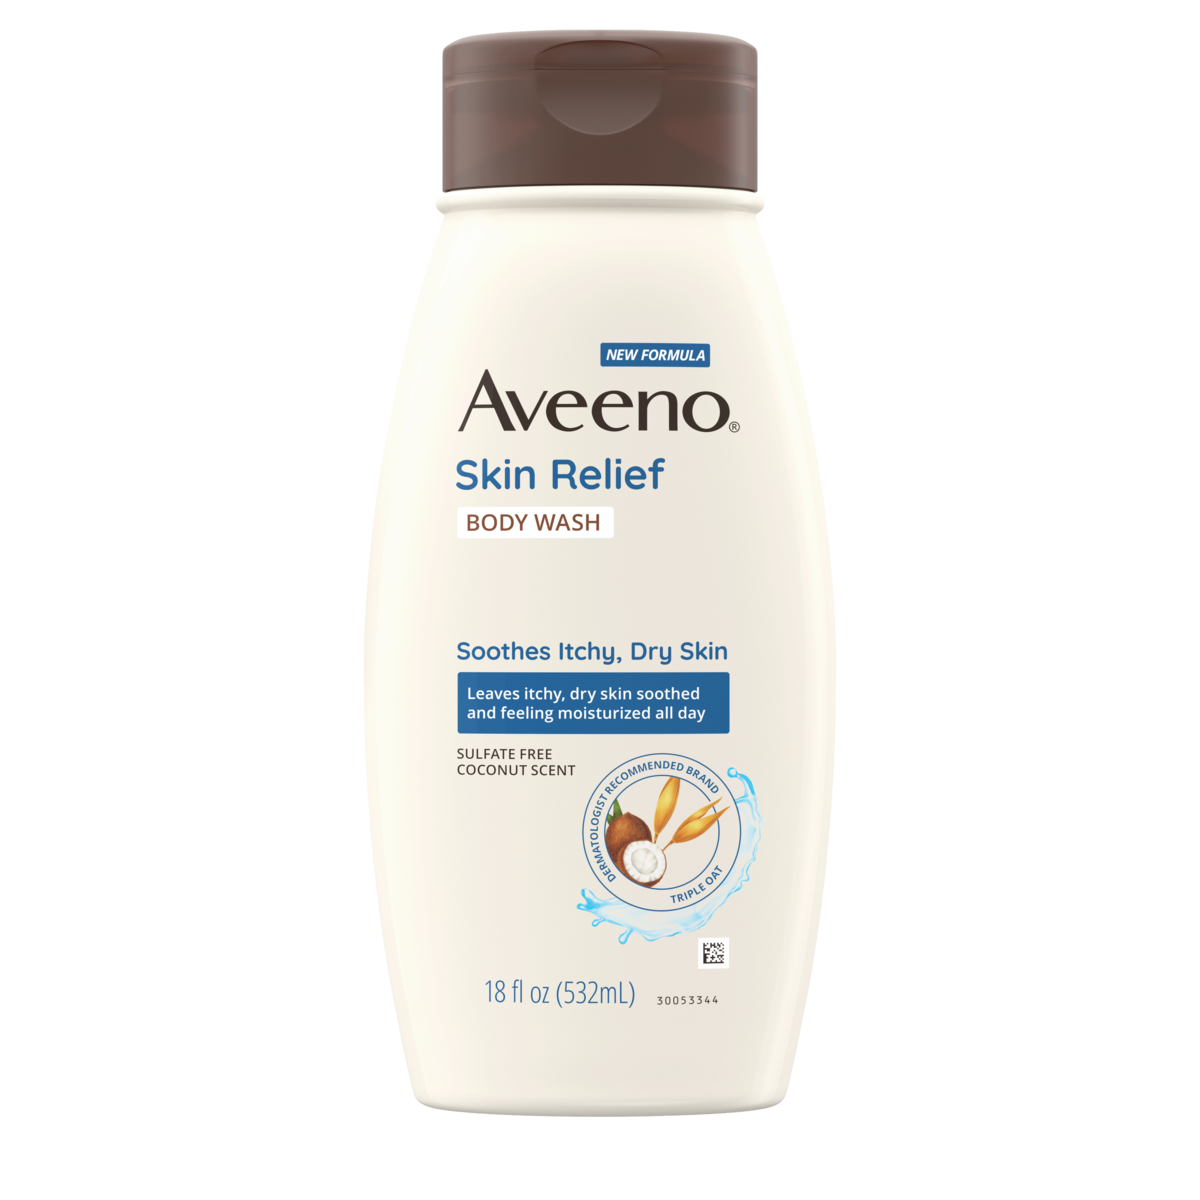 Aveeno Skin Relief Fragrance-Free Moisturizing Lotion for Sensitive Skin,  with Natural Shea Butter & Triple Oat Complex, Unscented Therapeutic Body